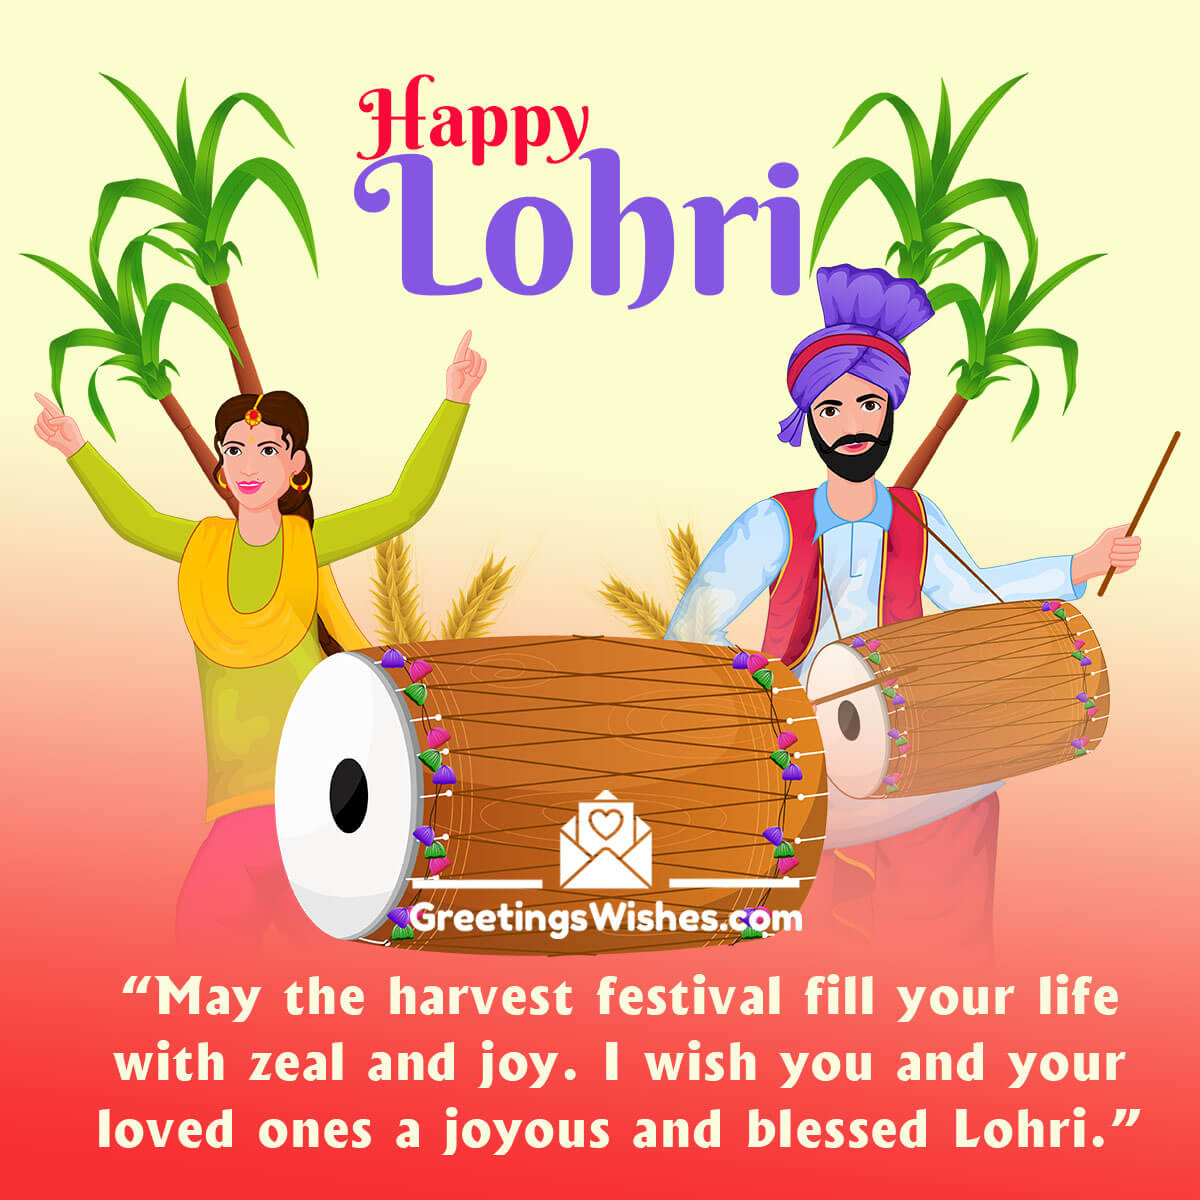 Quotes For Lohri In English